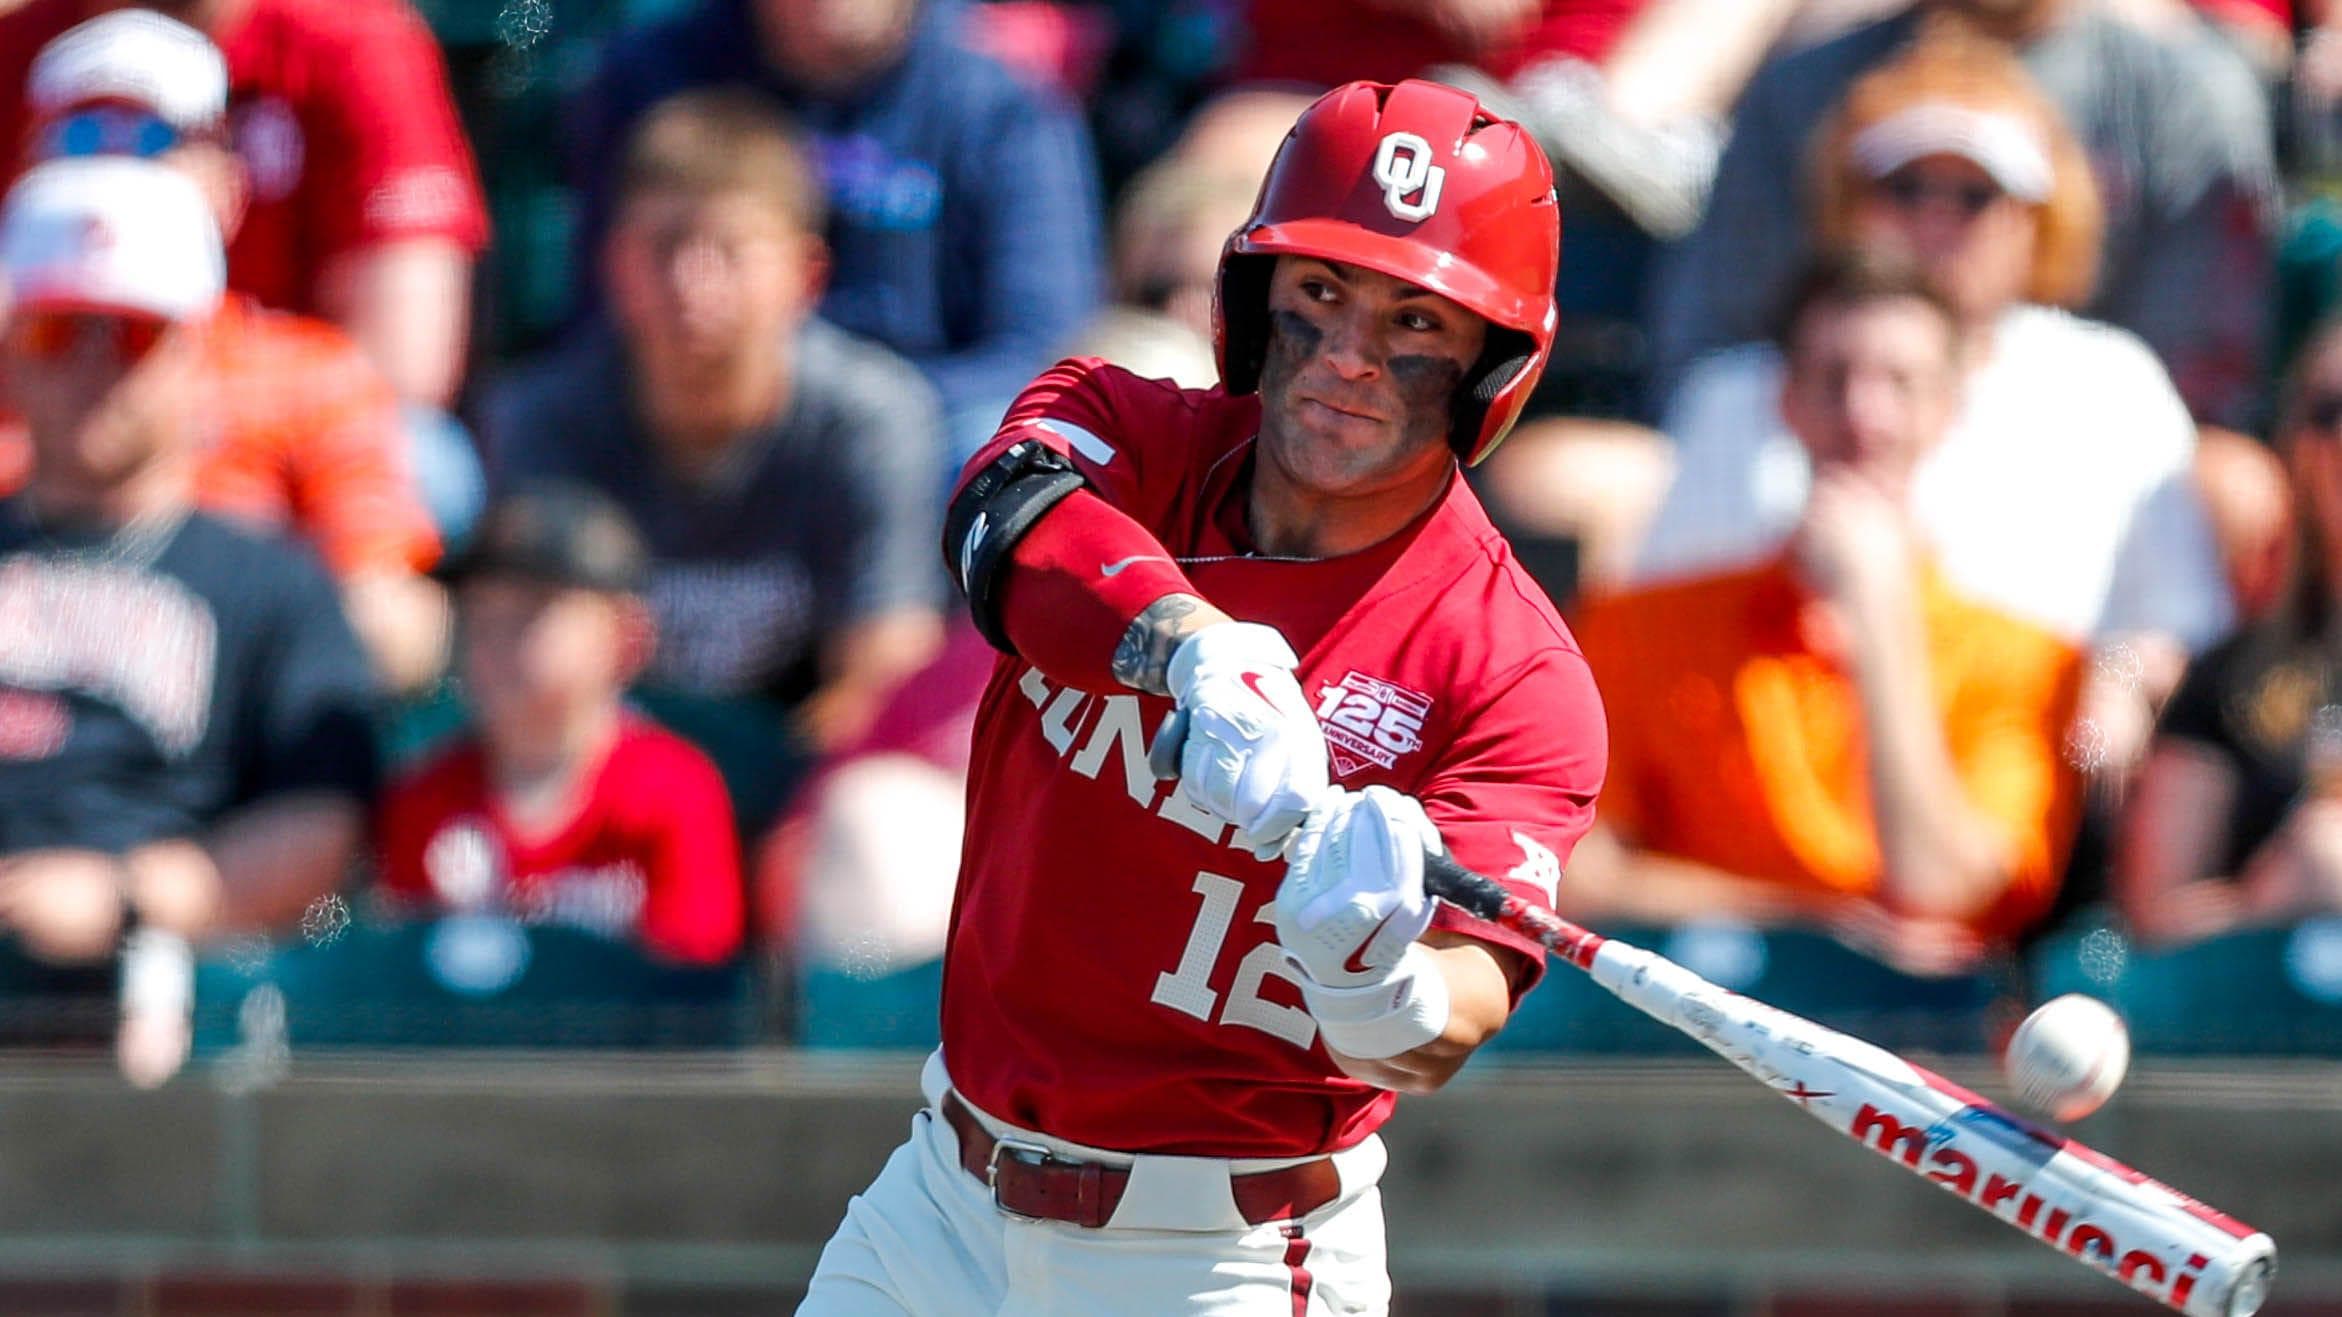 OU Baseball Sweeps BYU: Sooners’ Bryce Madron Hits 2 Home Runs, Drives in 7